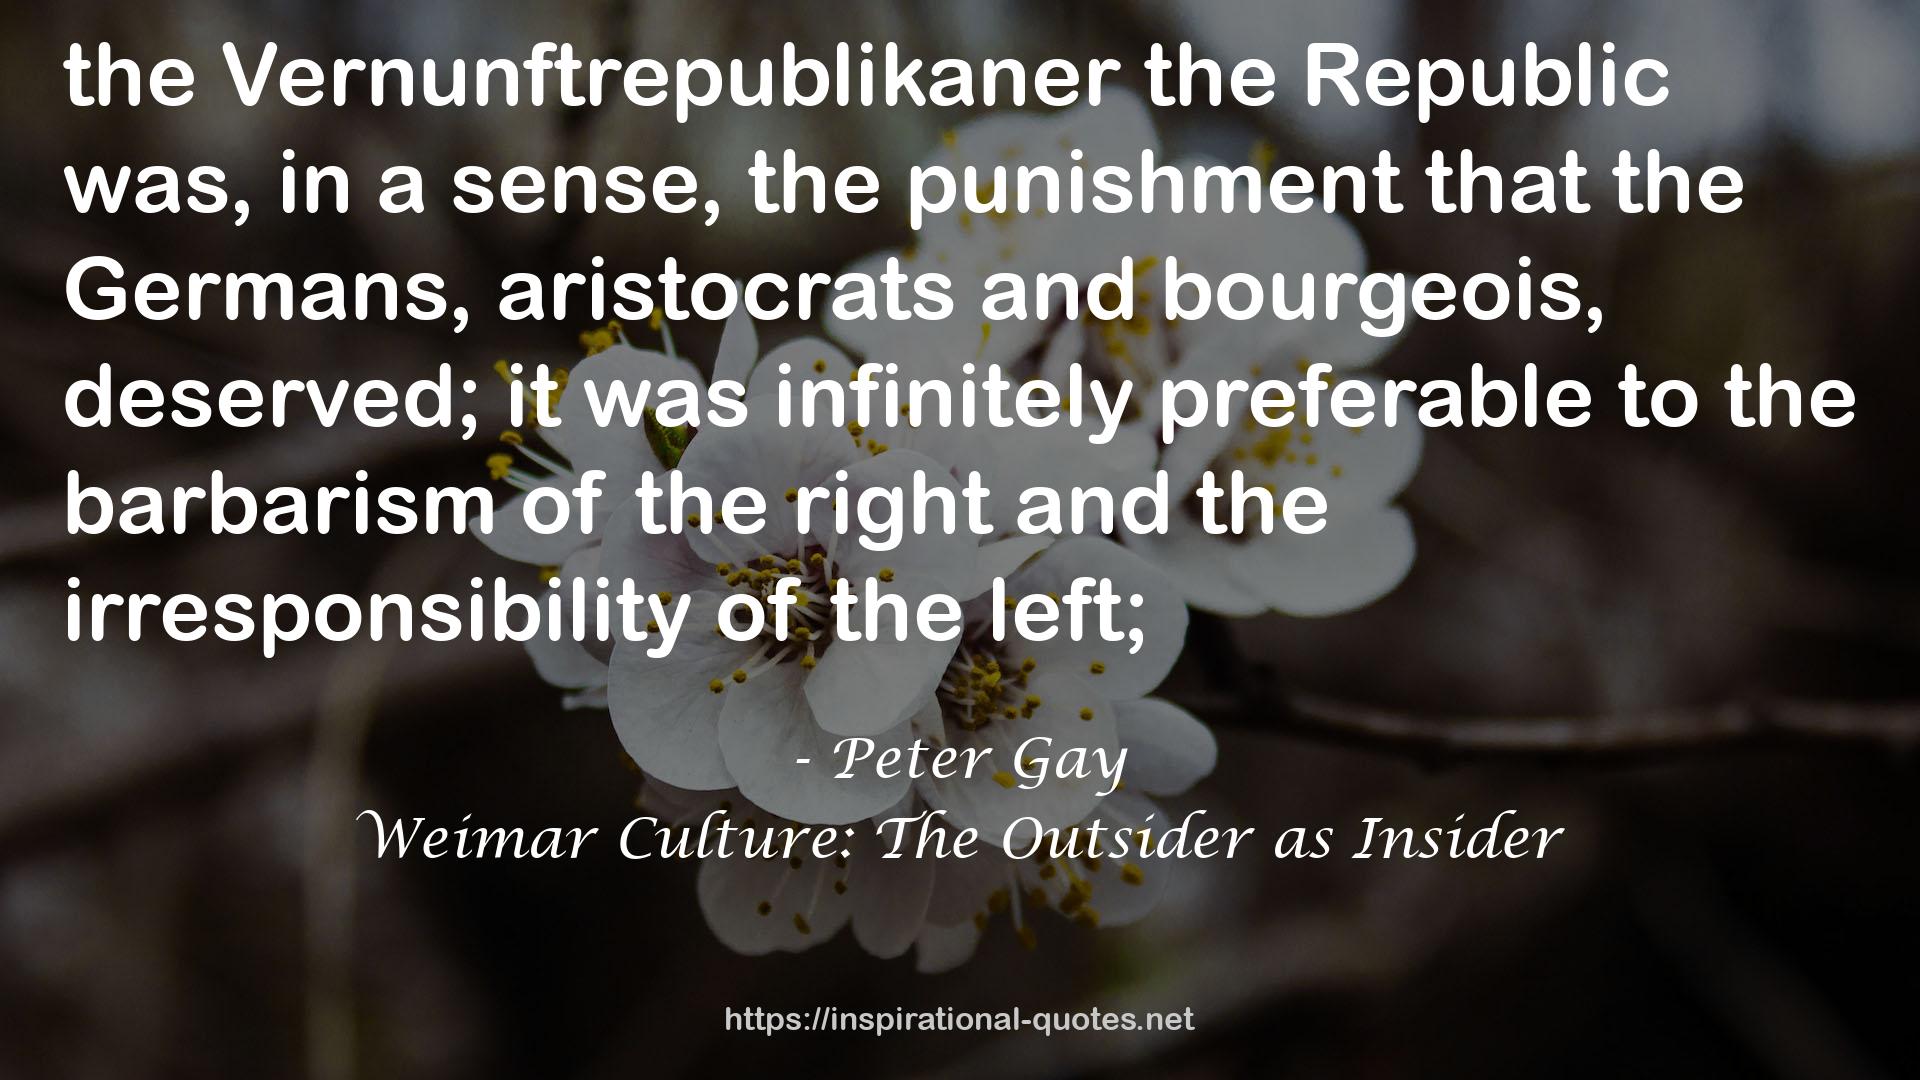 Weimar Culture: The Outsider as Insider QUOTES